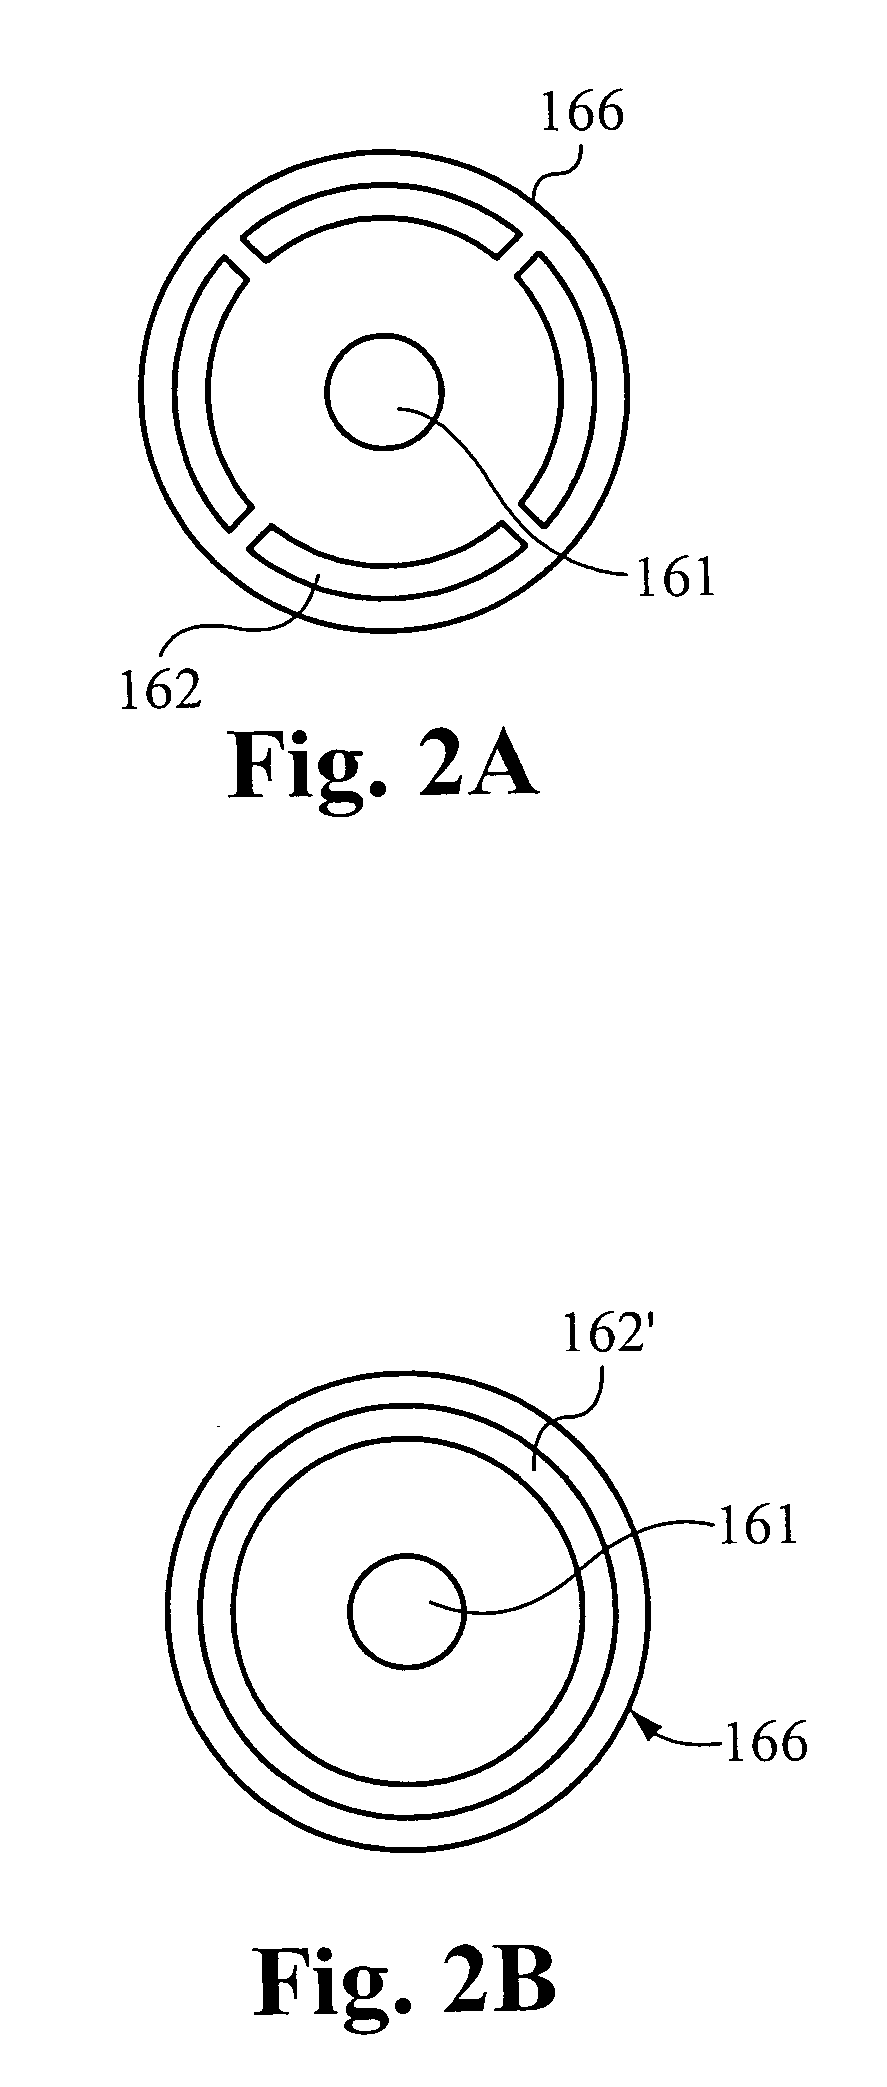 Shape of cone and air input annulus